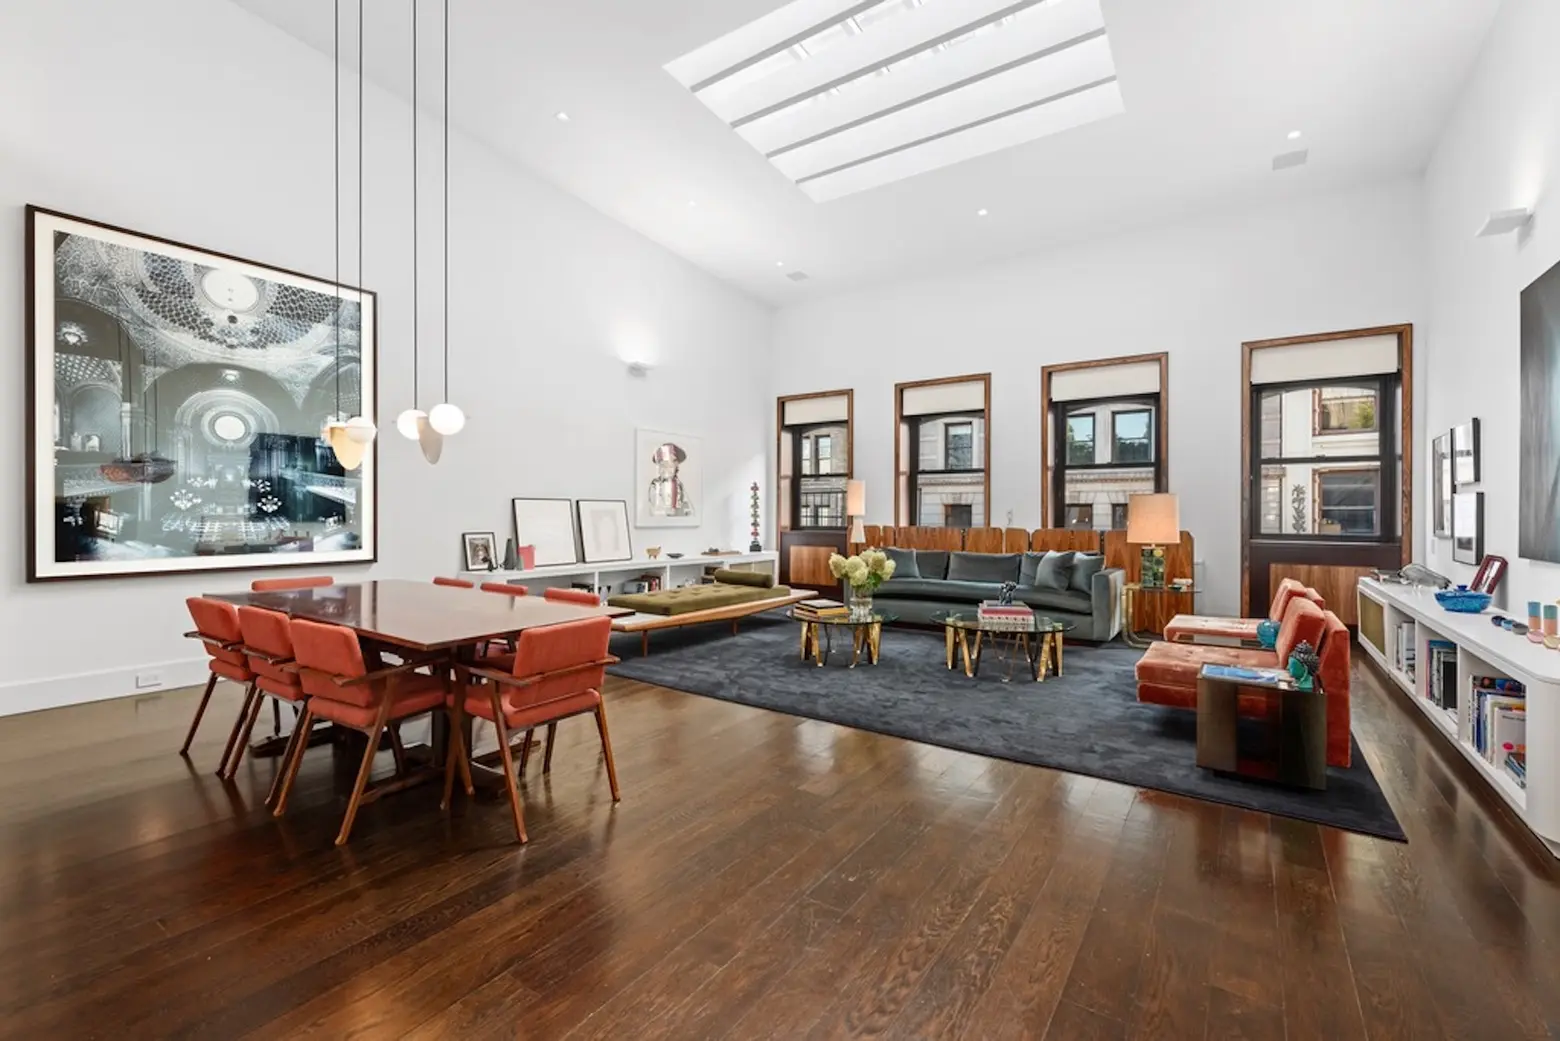 This lofty $7.5M Village co-op would be perfect for an art lover or an avid gardener